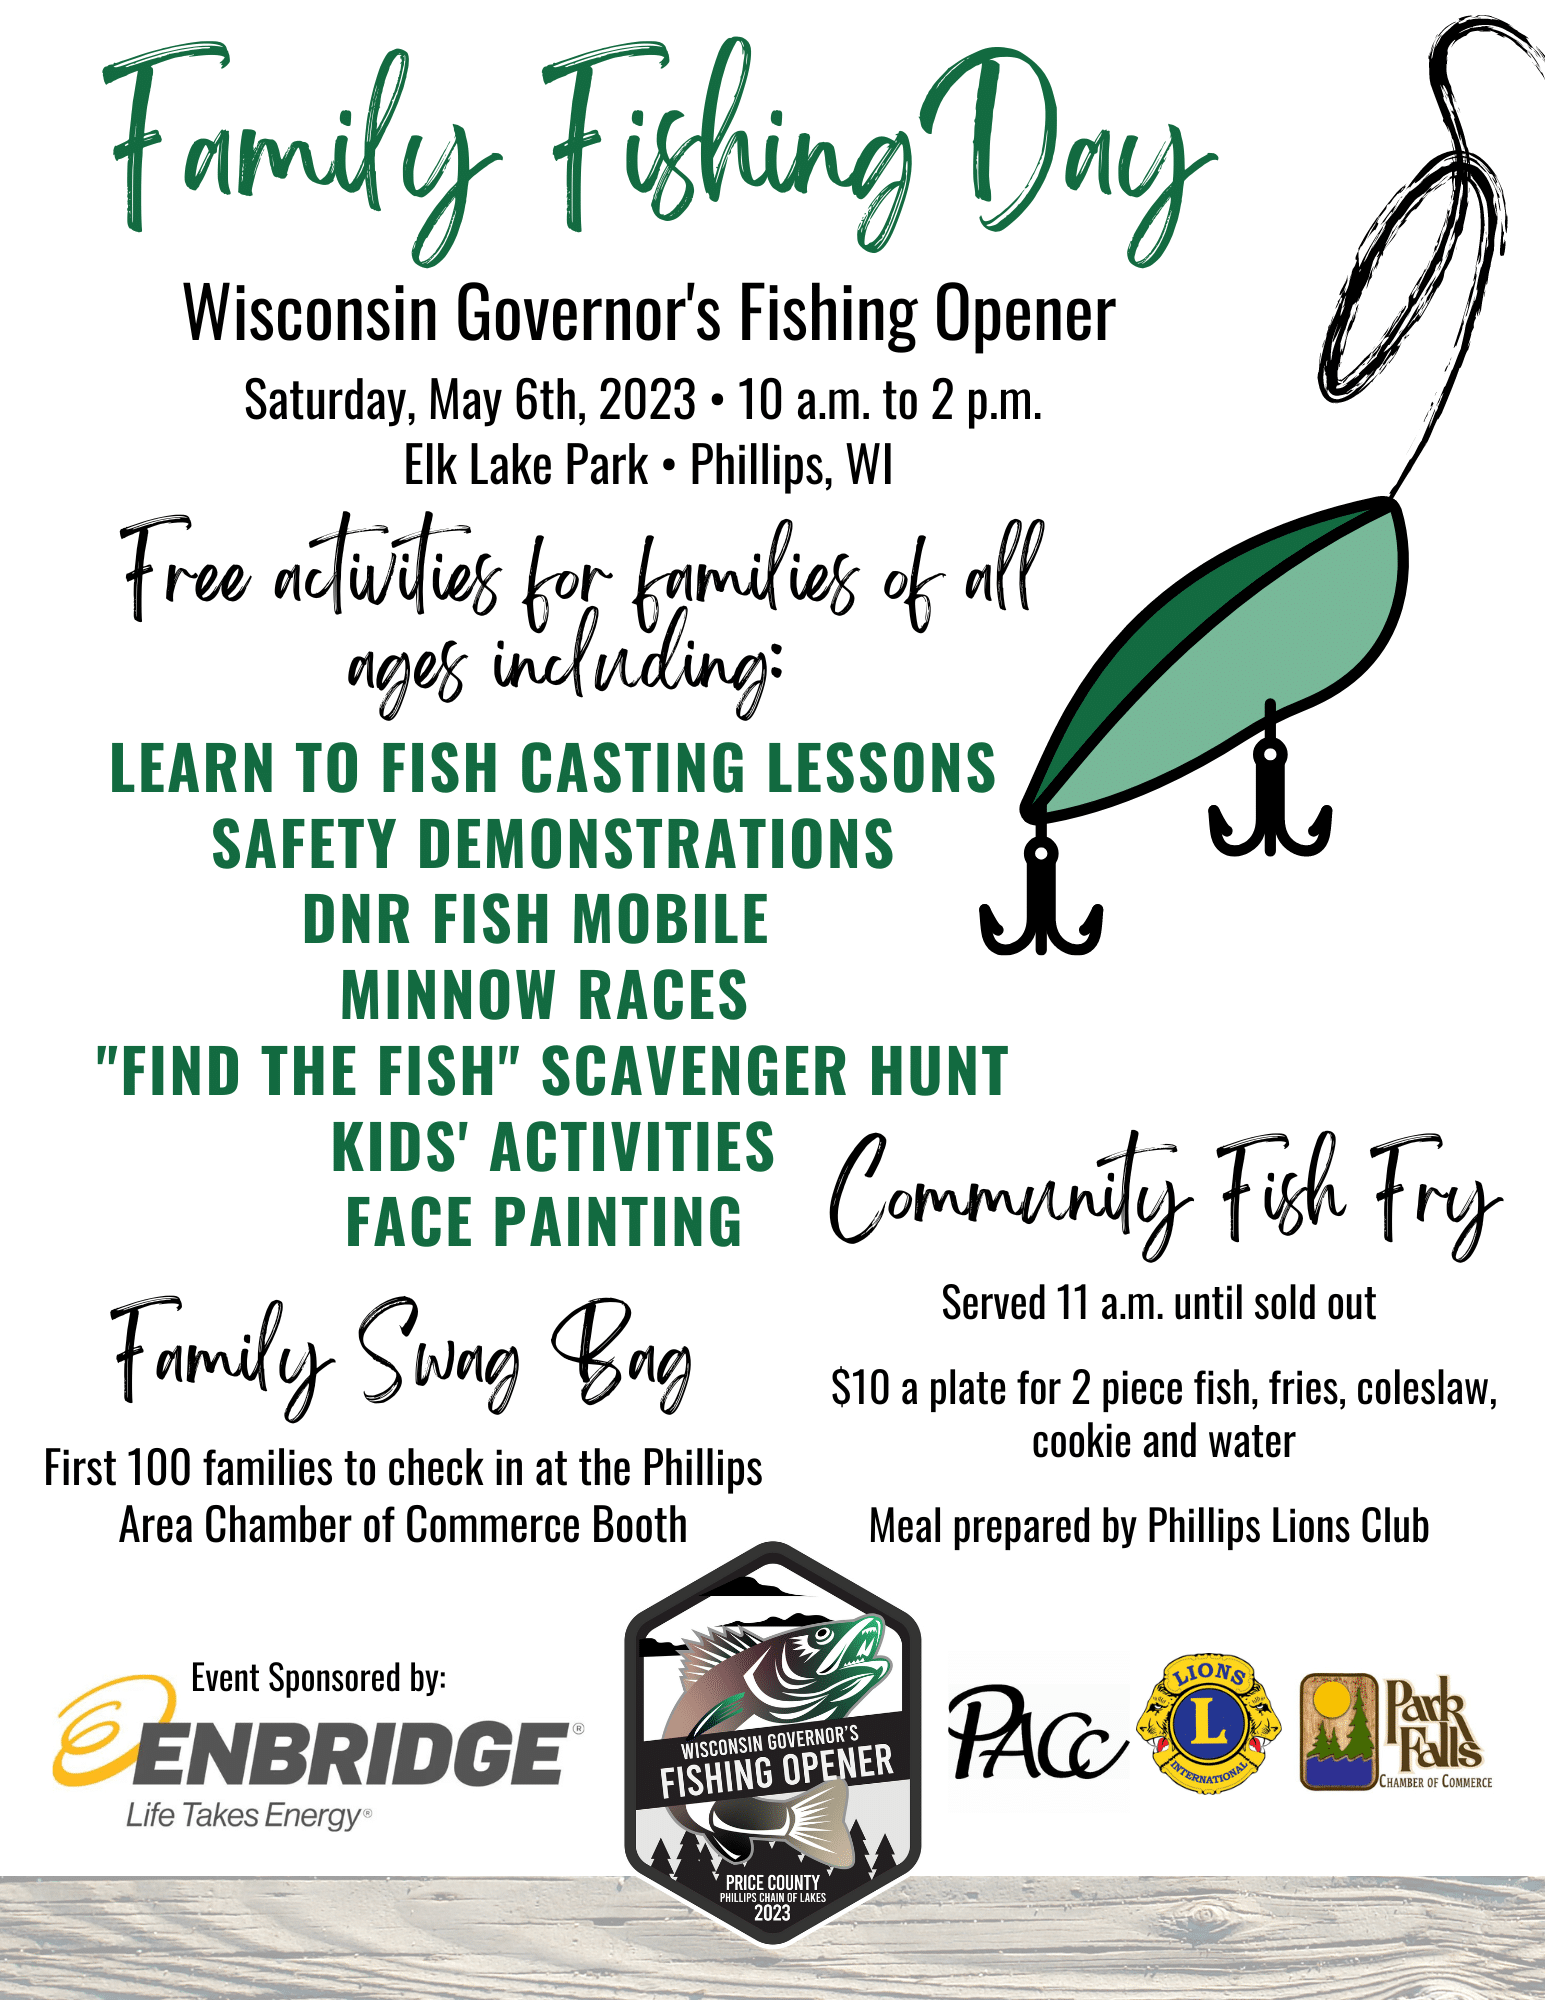 Image of flyer for Family Fishing Day